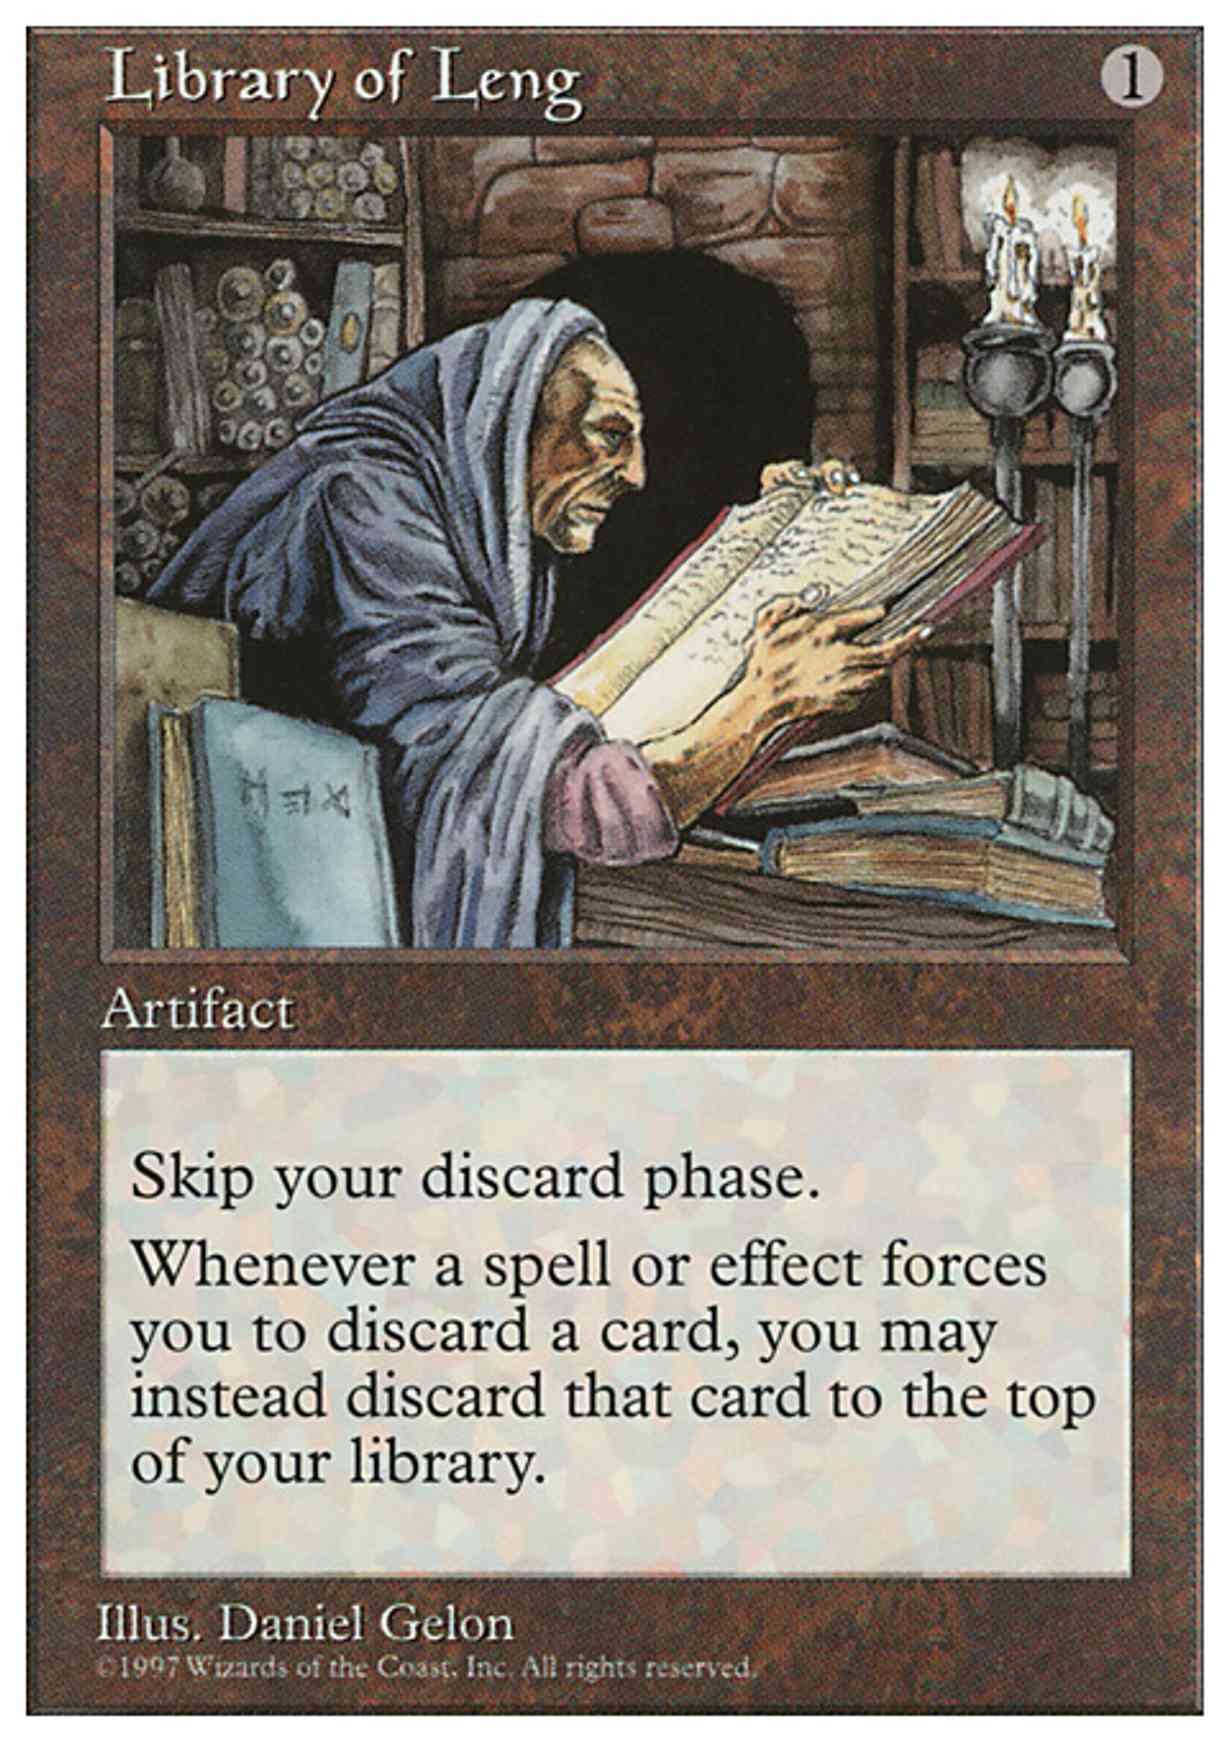 Library of Leng magic card front